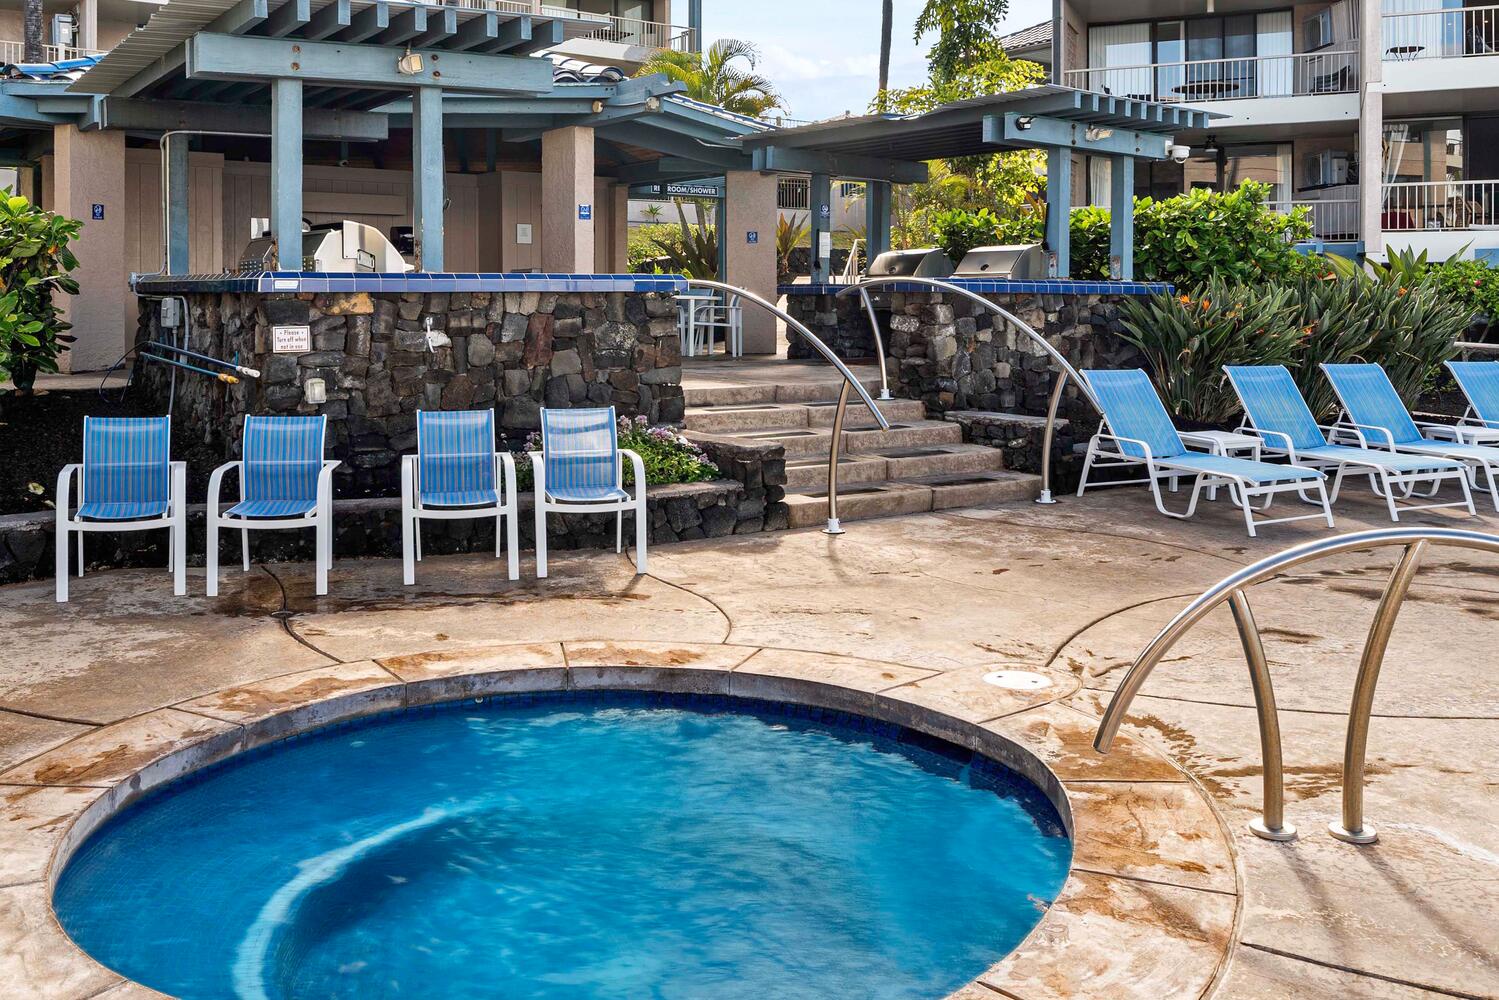 Kailua Kona Vacation Rentals, Kona Reef F23 - Relax by the spa pool with sun loungers